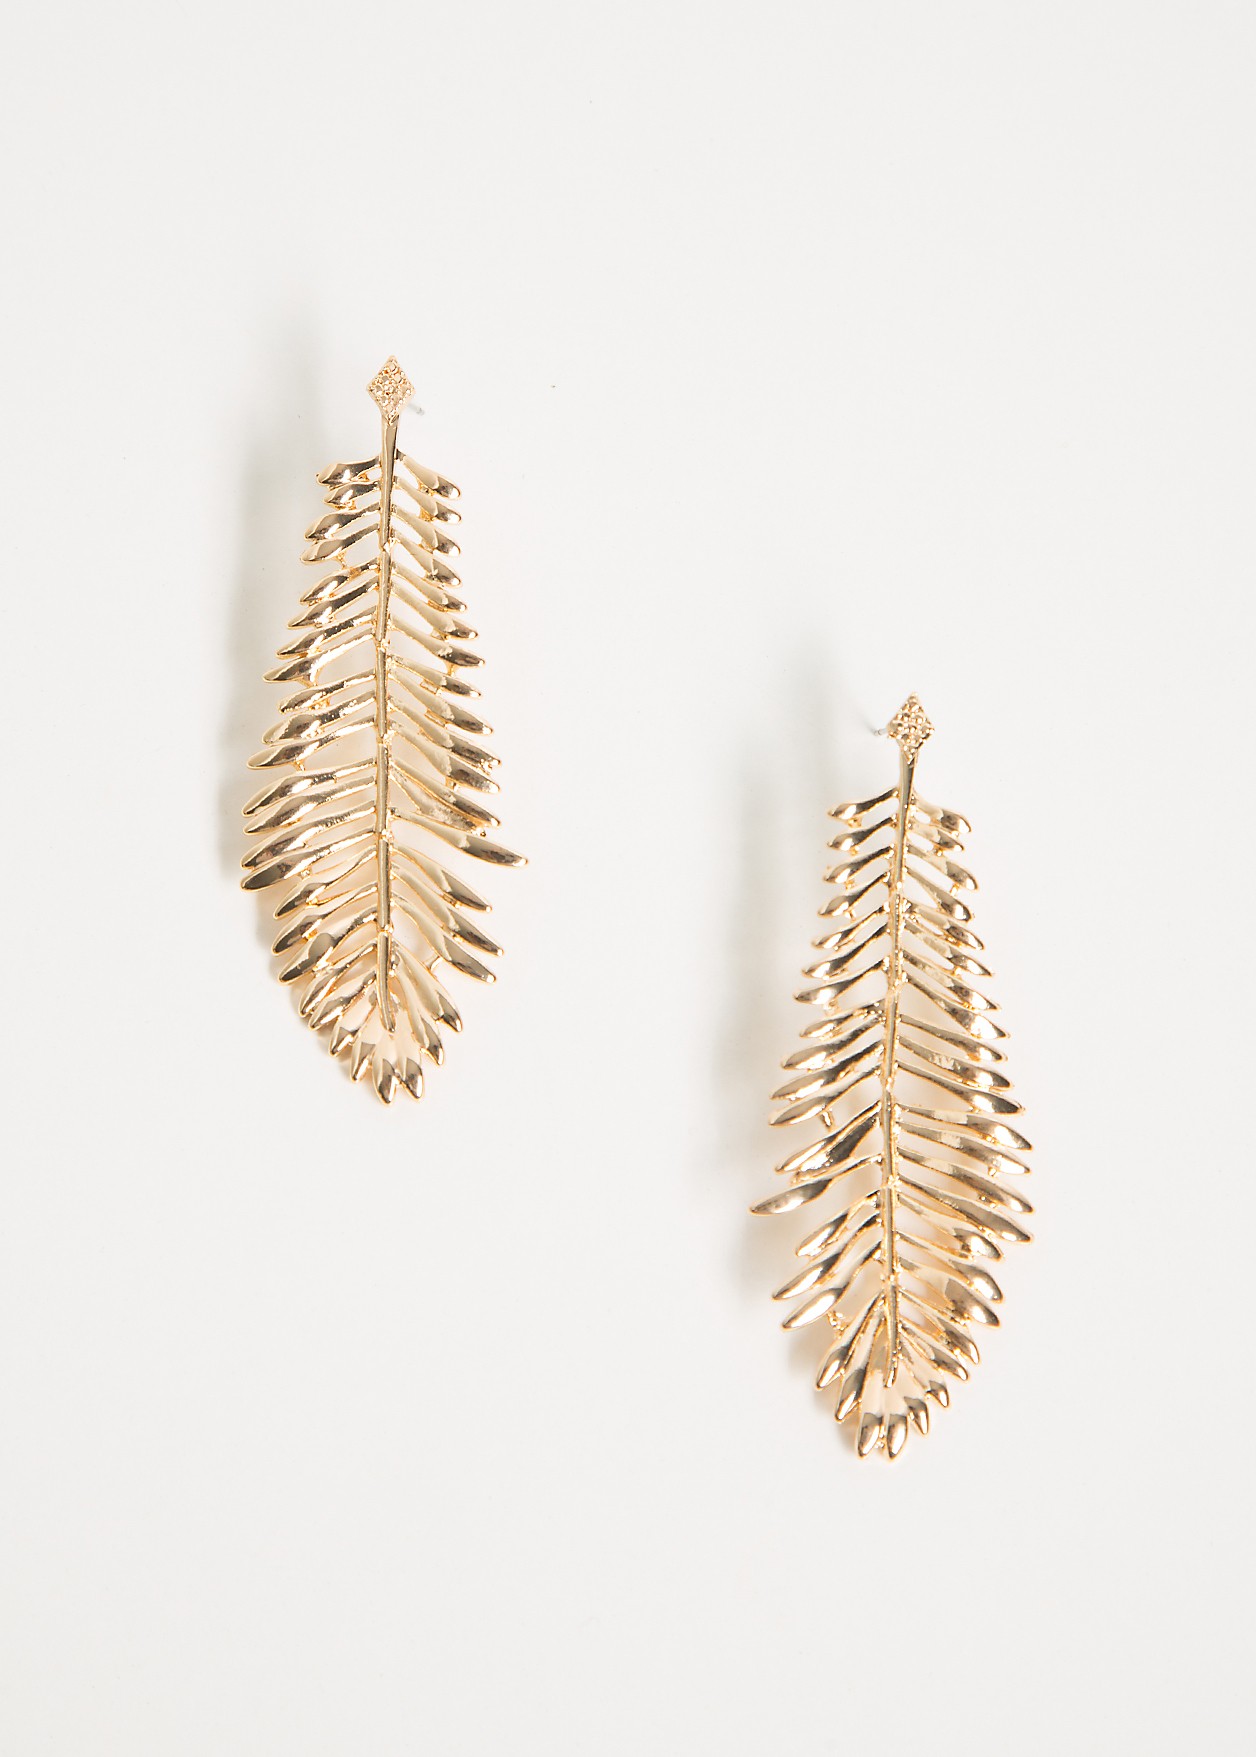 Earrings with leaf details